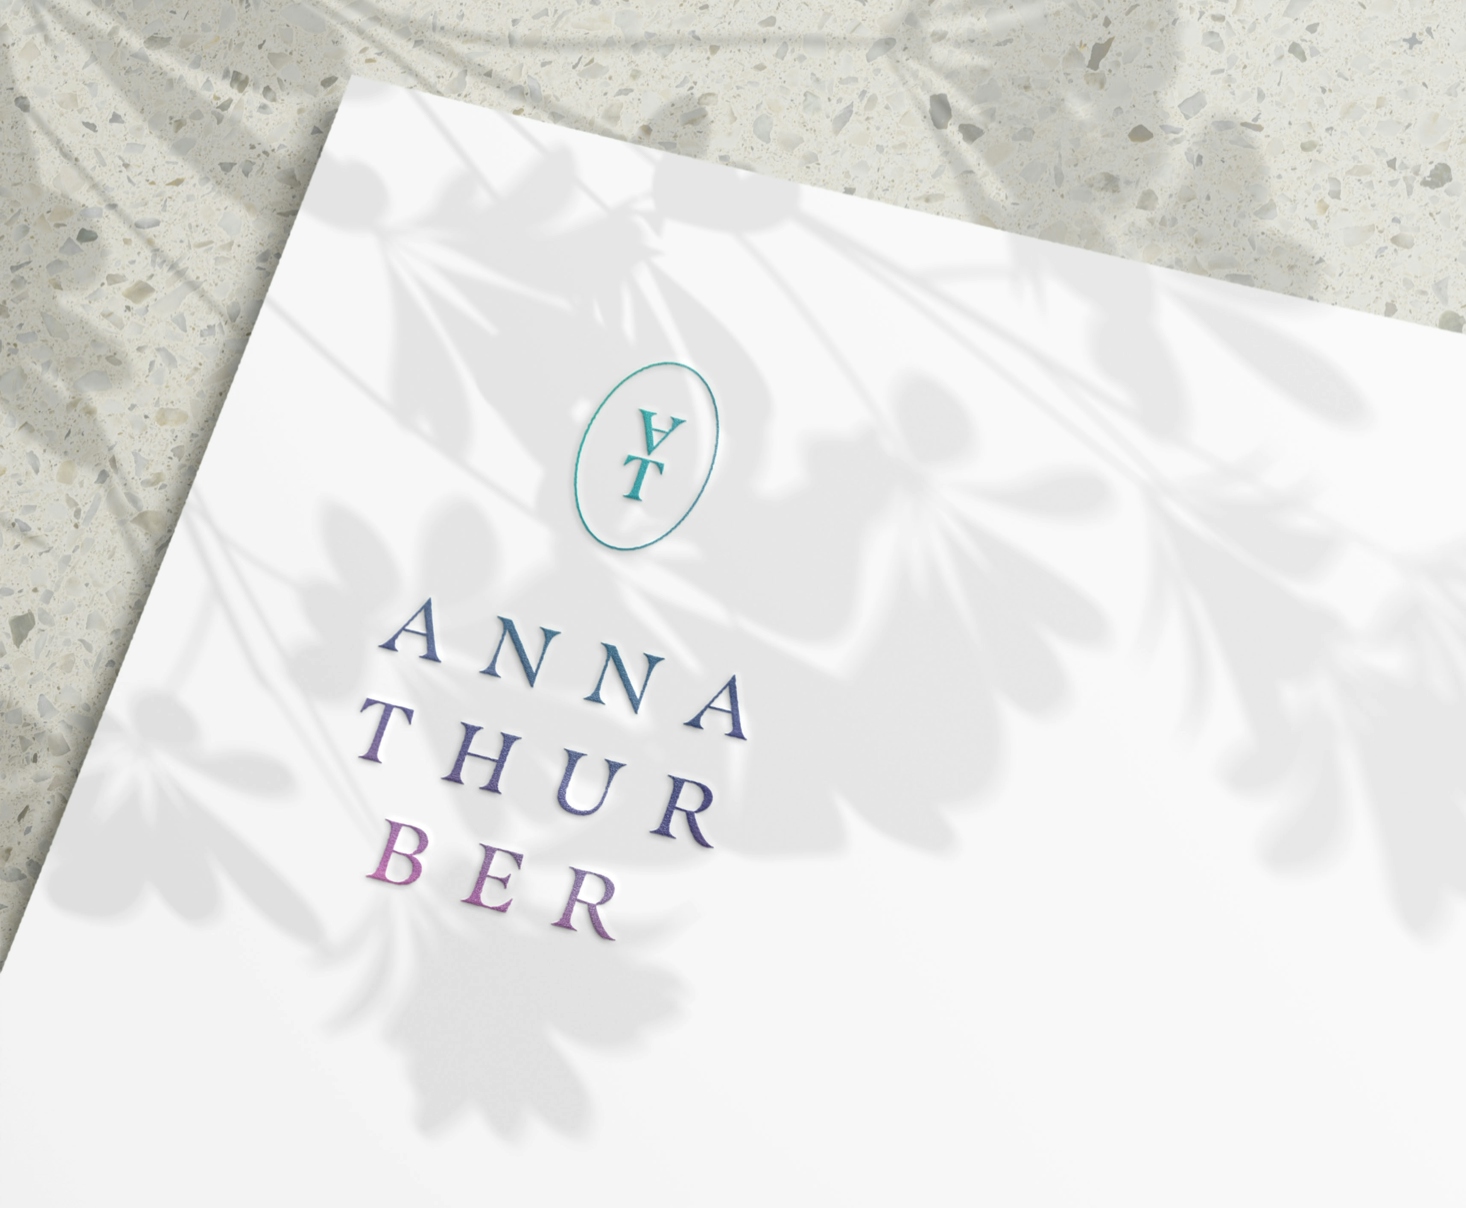 A logo for “Anna Thurber” on a page with shadows of leaves